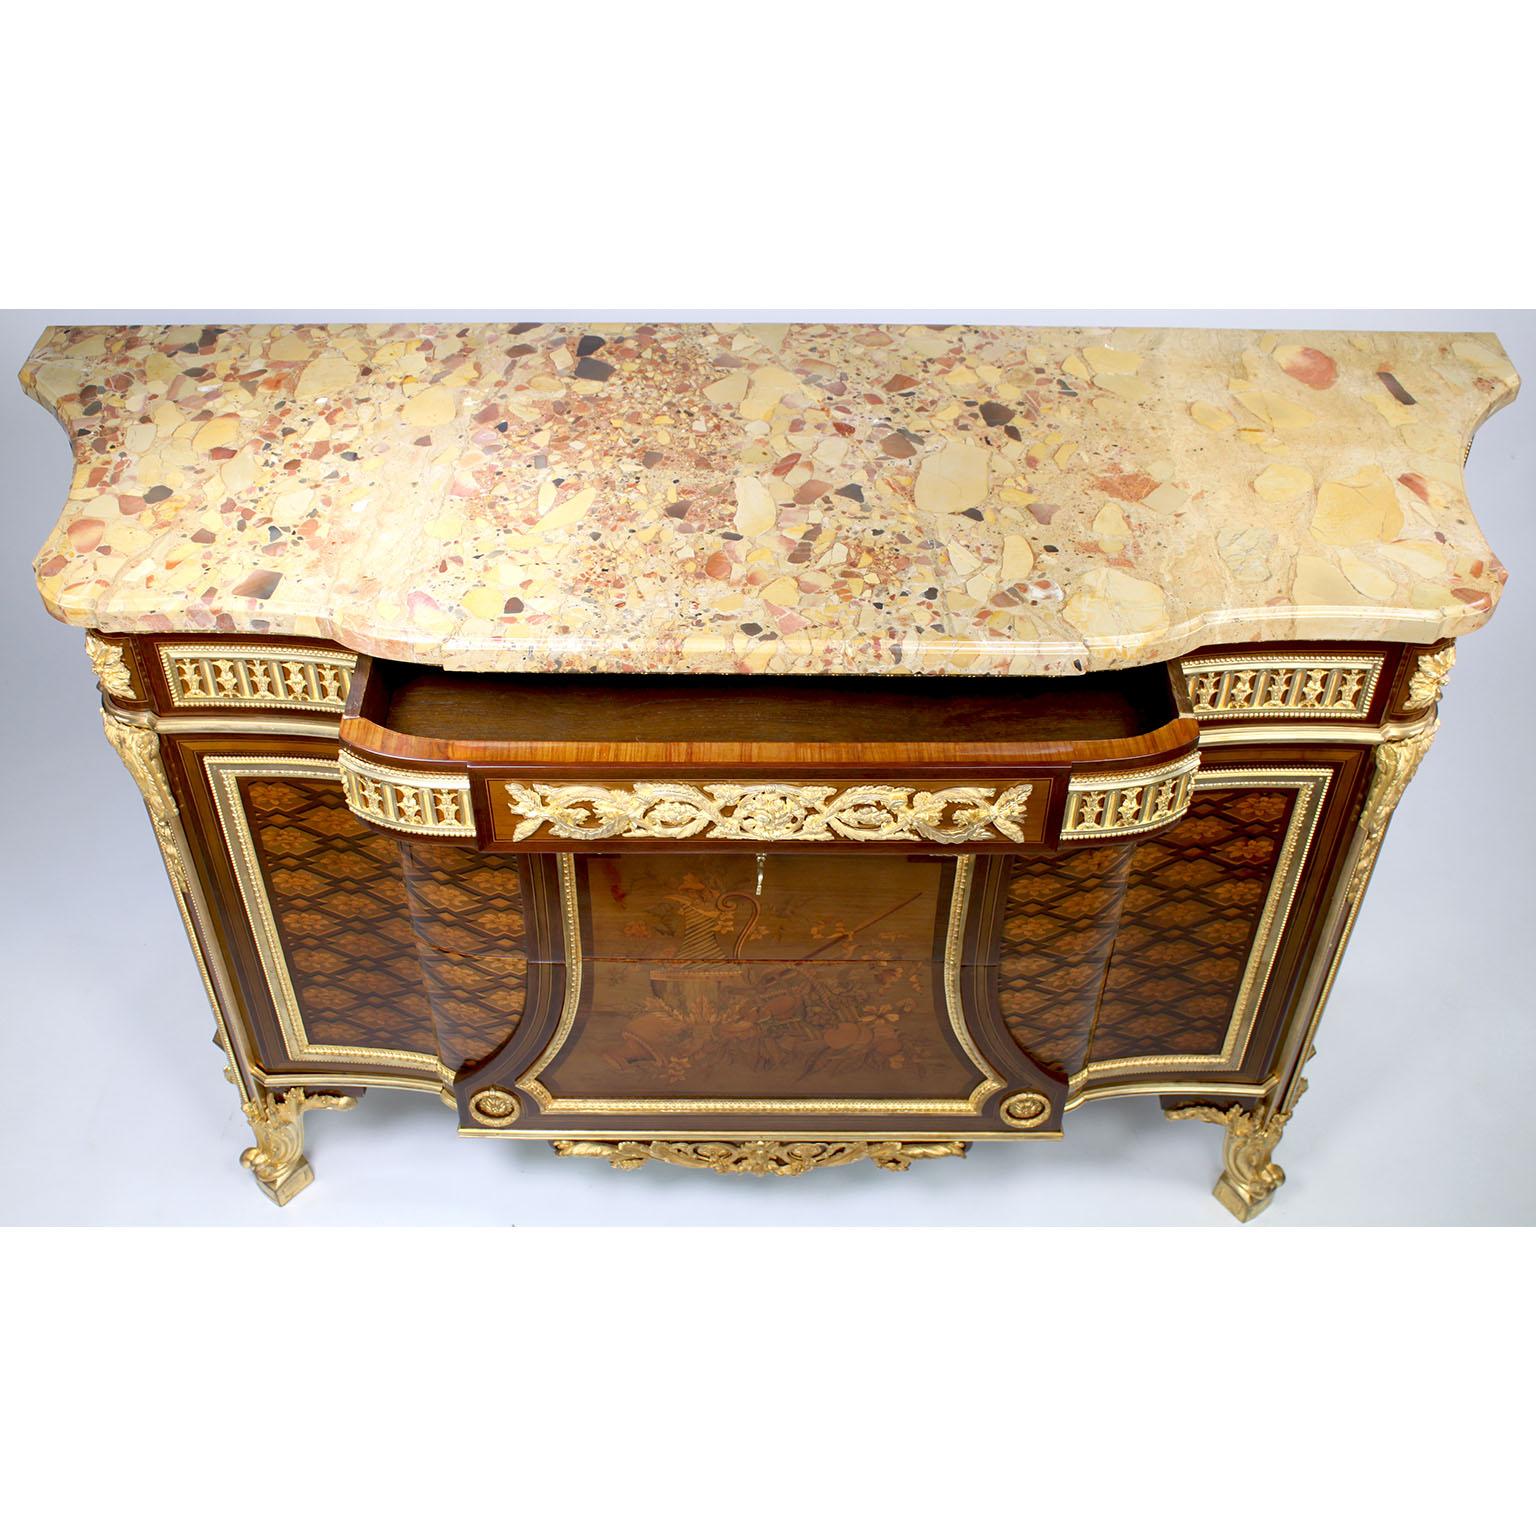 French 19th Century Louis XV-XVI Ormolu Mounted Marquetry Commode Marble Top For Sale 11